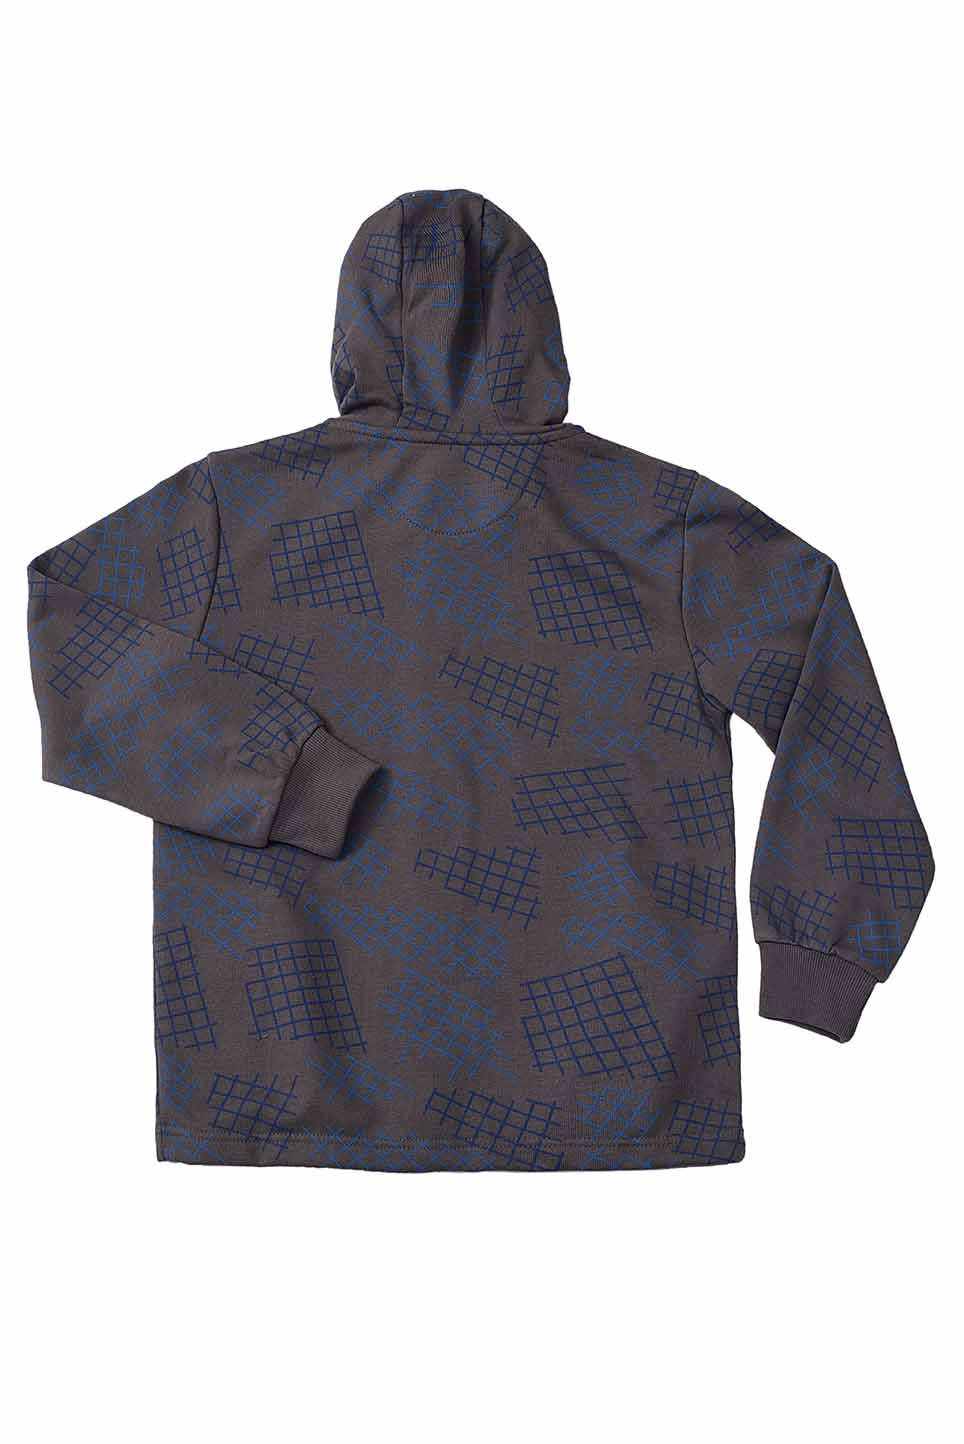 KDS-BC-12740 HOODED PULL OVER W/PTD GREY